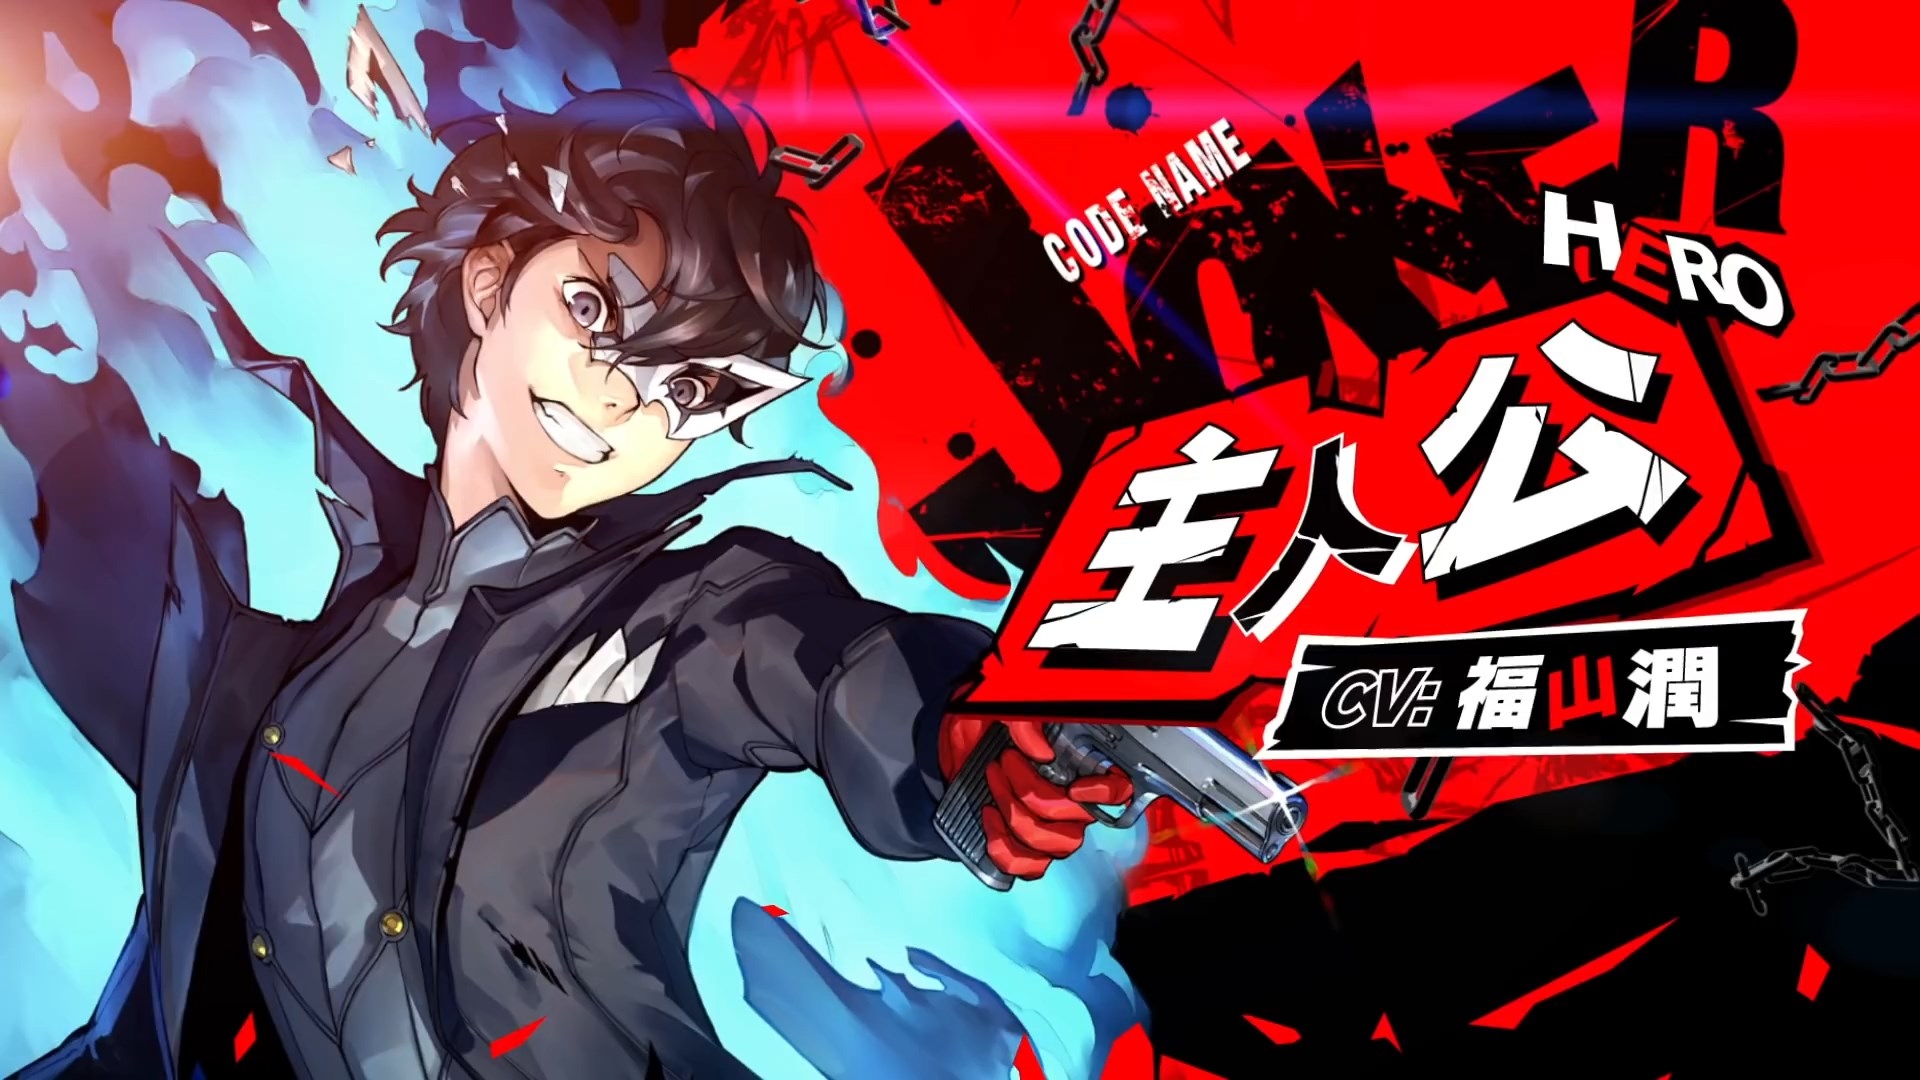 19x Joker Persona 5 Scramble The Phantom Strikers 19x Resolution Wallpaper Hd Games 4k Wallpapers Images Photos And Background Wallpapers Den